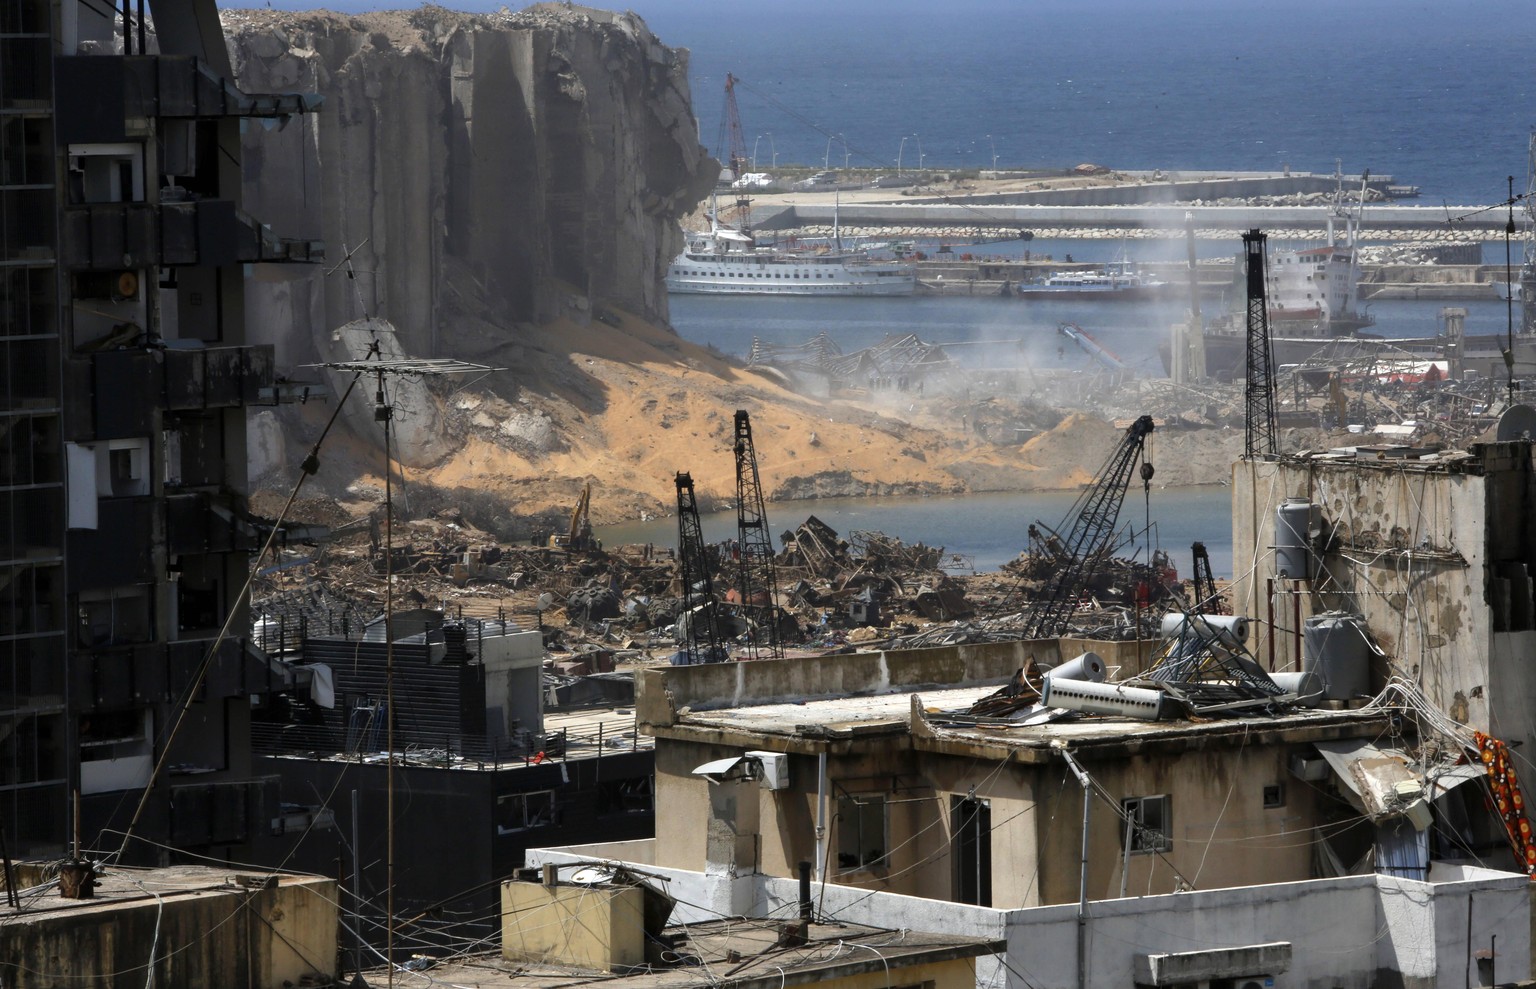 August 9, 2020, Beirut, Beirut, Lebanon: A picture shows damaged buildings in the aftermath of a colossal explosion that occurred days prior due to a huge pile of ammonium nitrate that had languished  ...